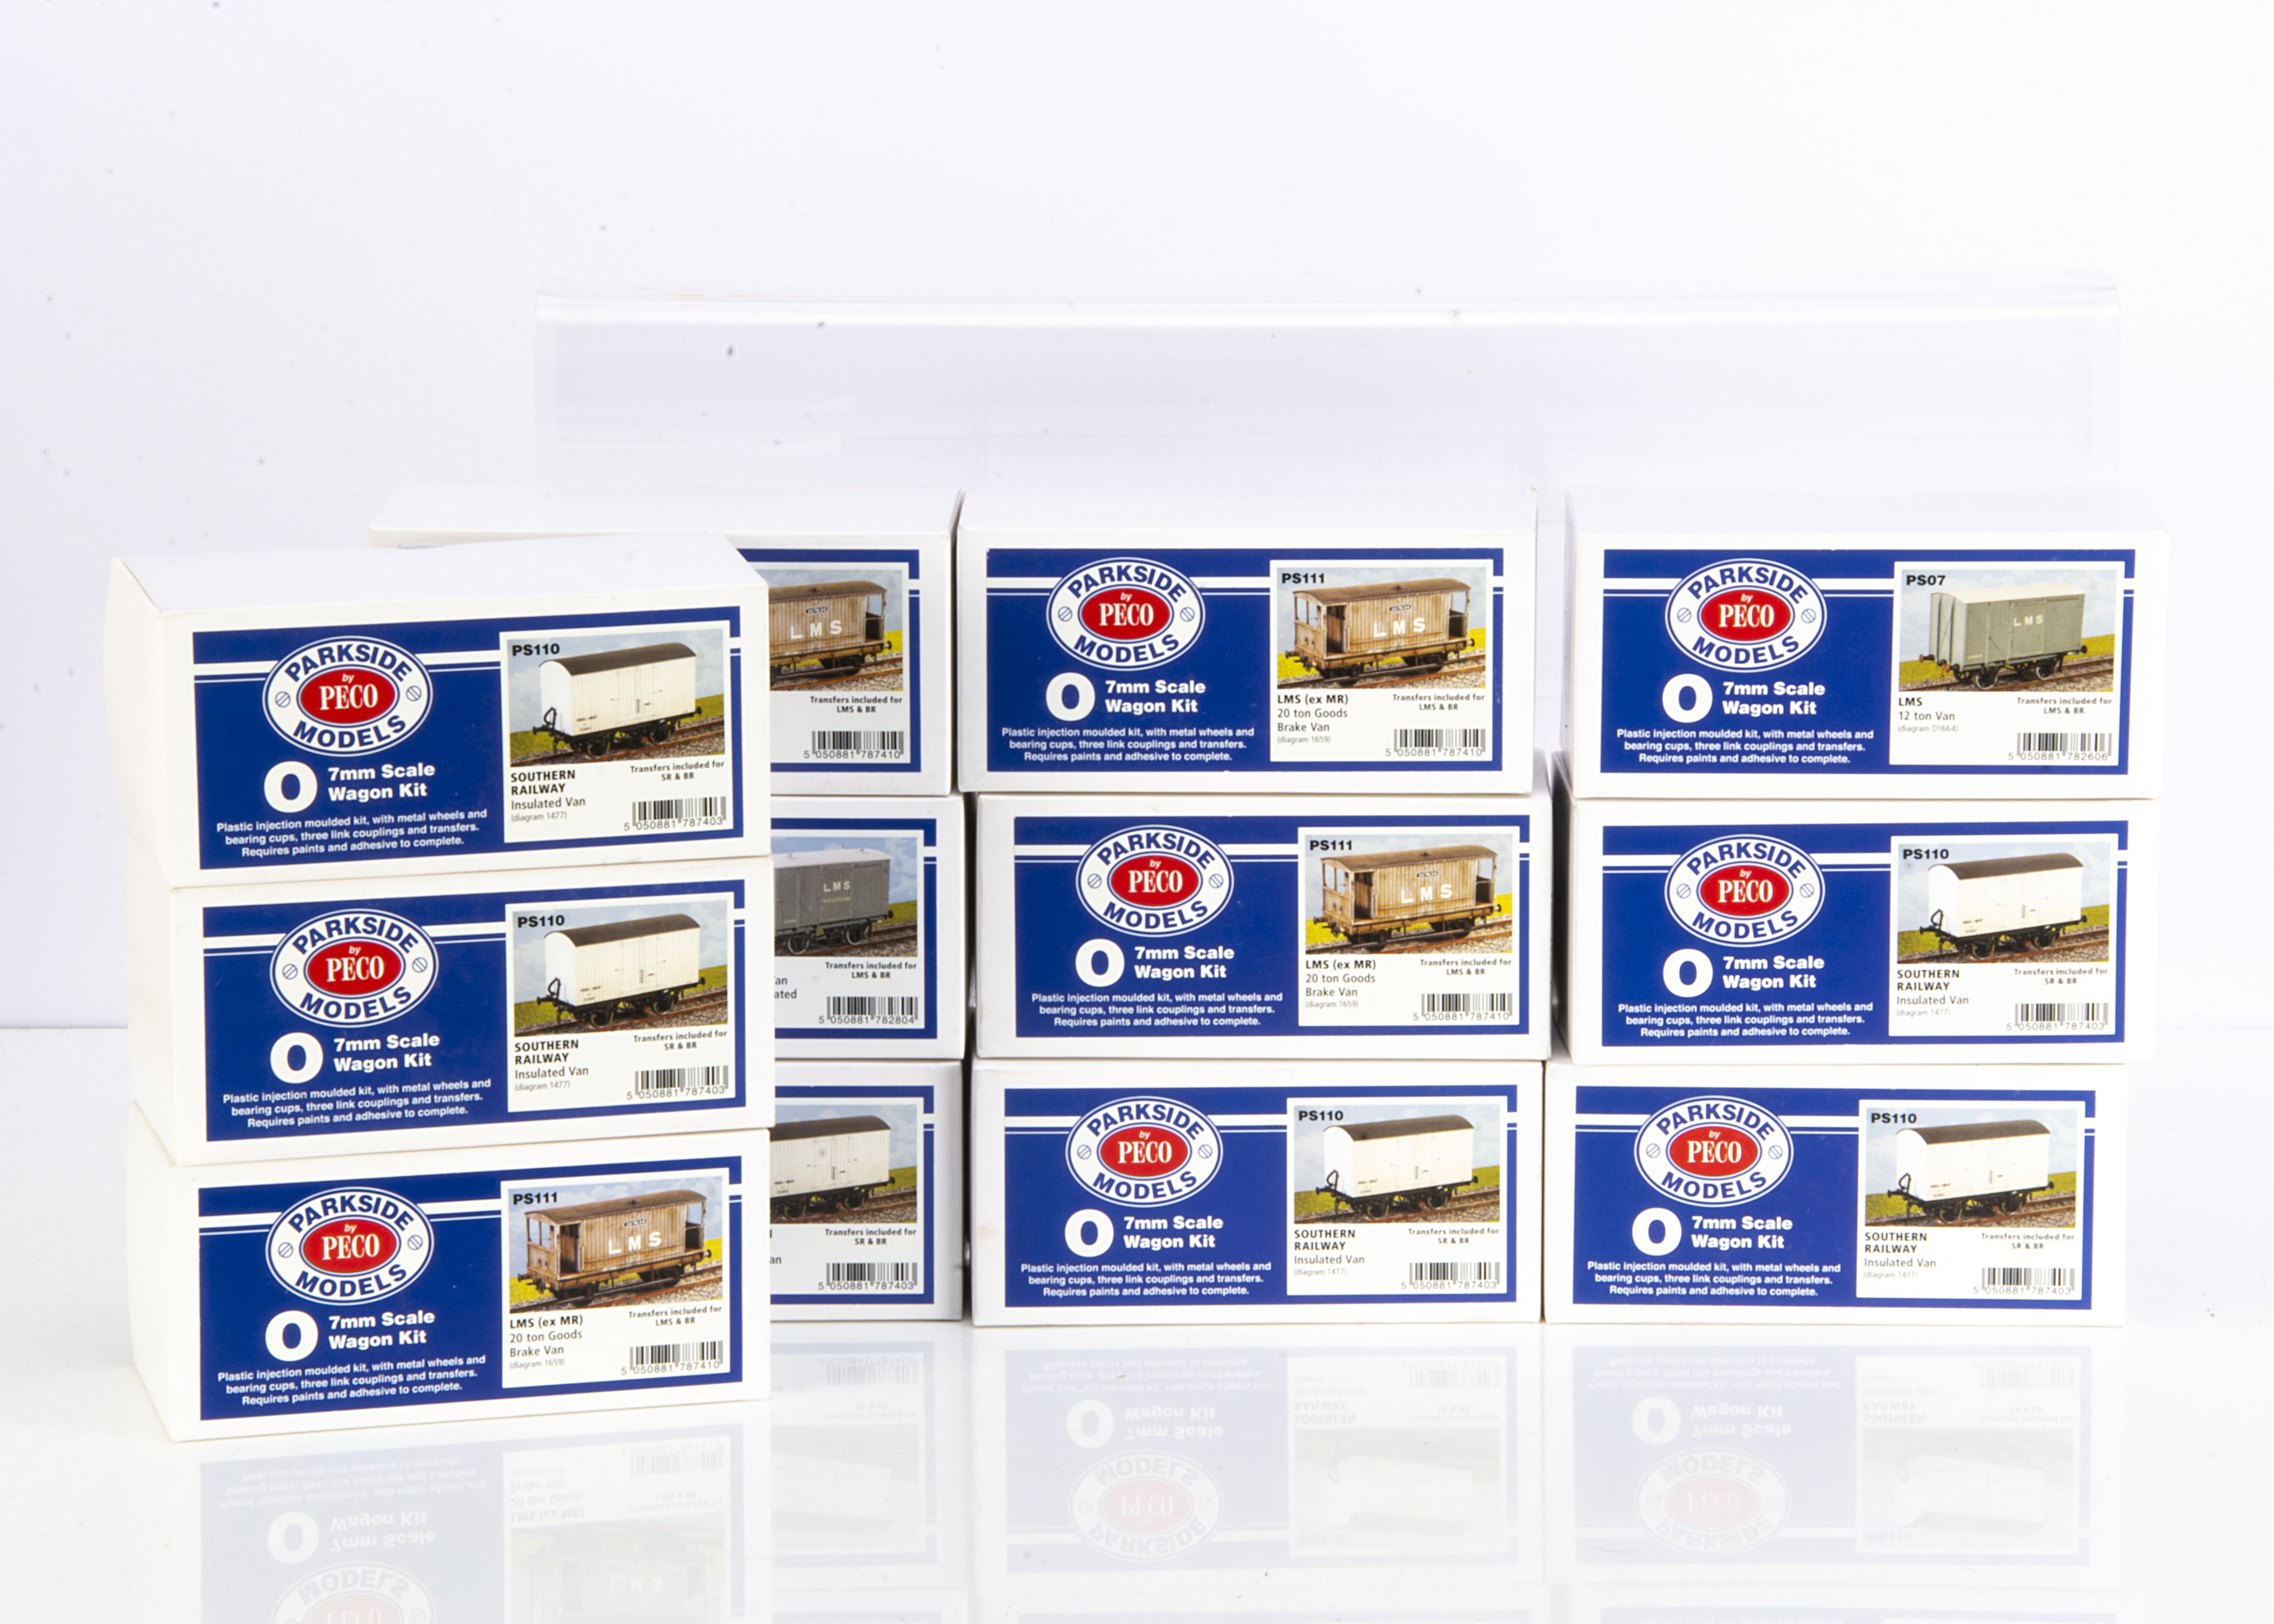 Finescale 0 Gauge Wagon Kits by Parkside Models, all in later blue-label boxes, comprising PS07,